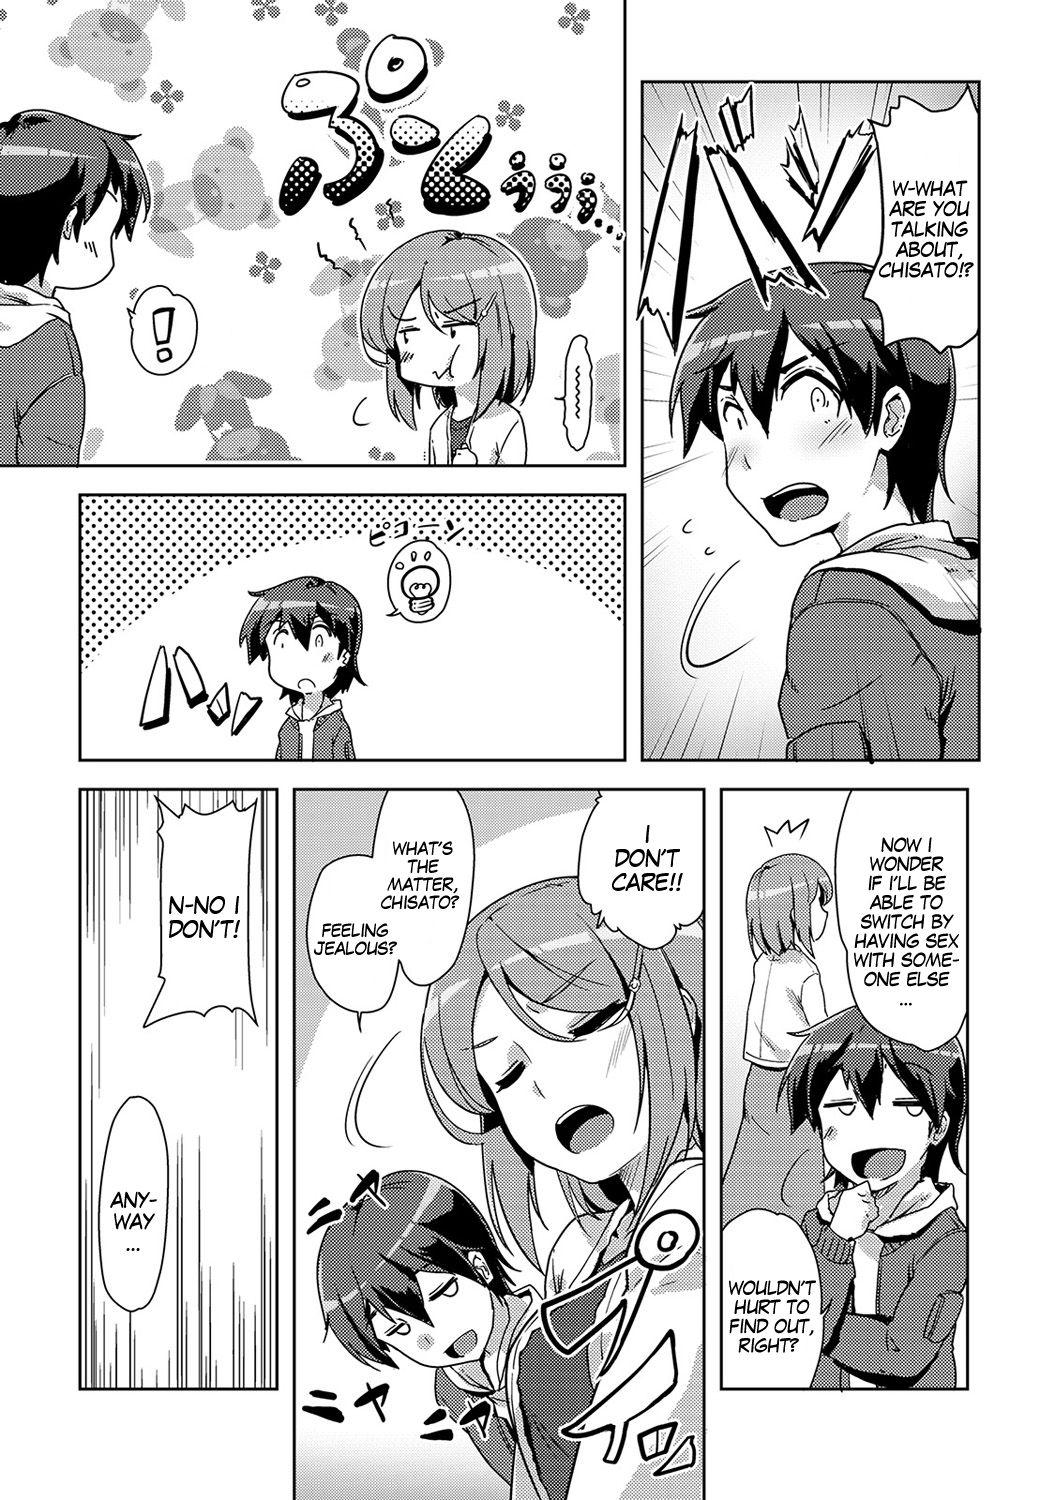 Ecchi Shitara Irekawacchatta!? | We Switched Our Bodies After Having Sex!? Ch. 6 8